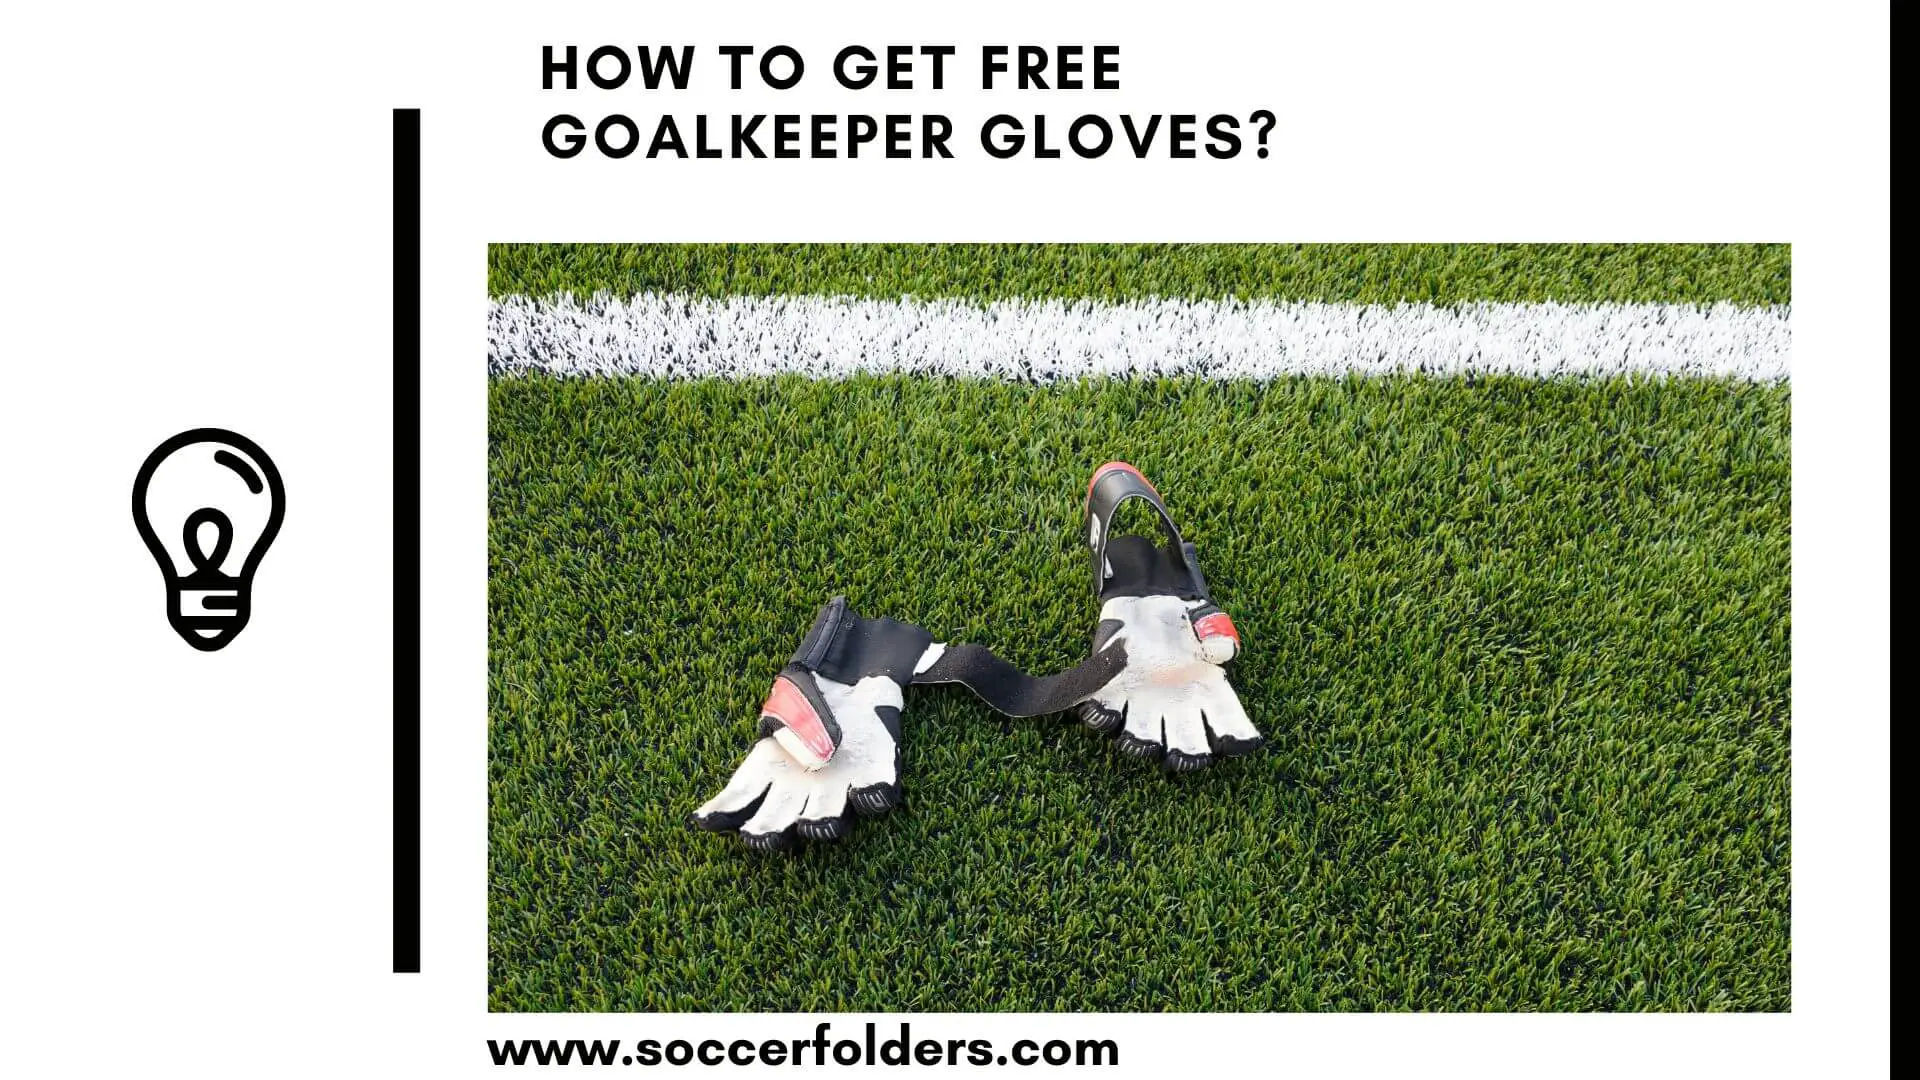 How to get free goalkeeper gloves - Featured image